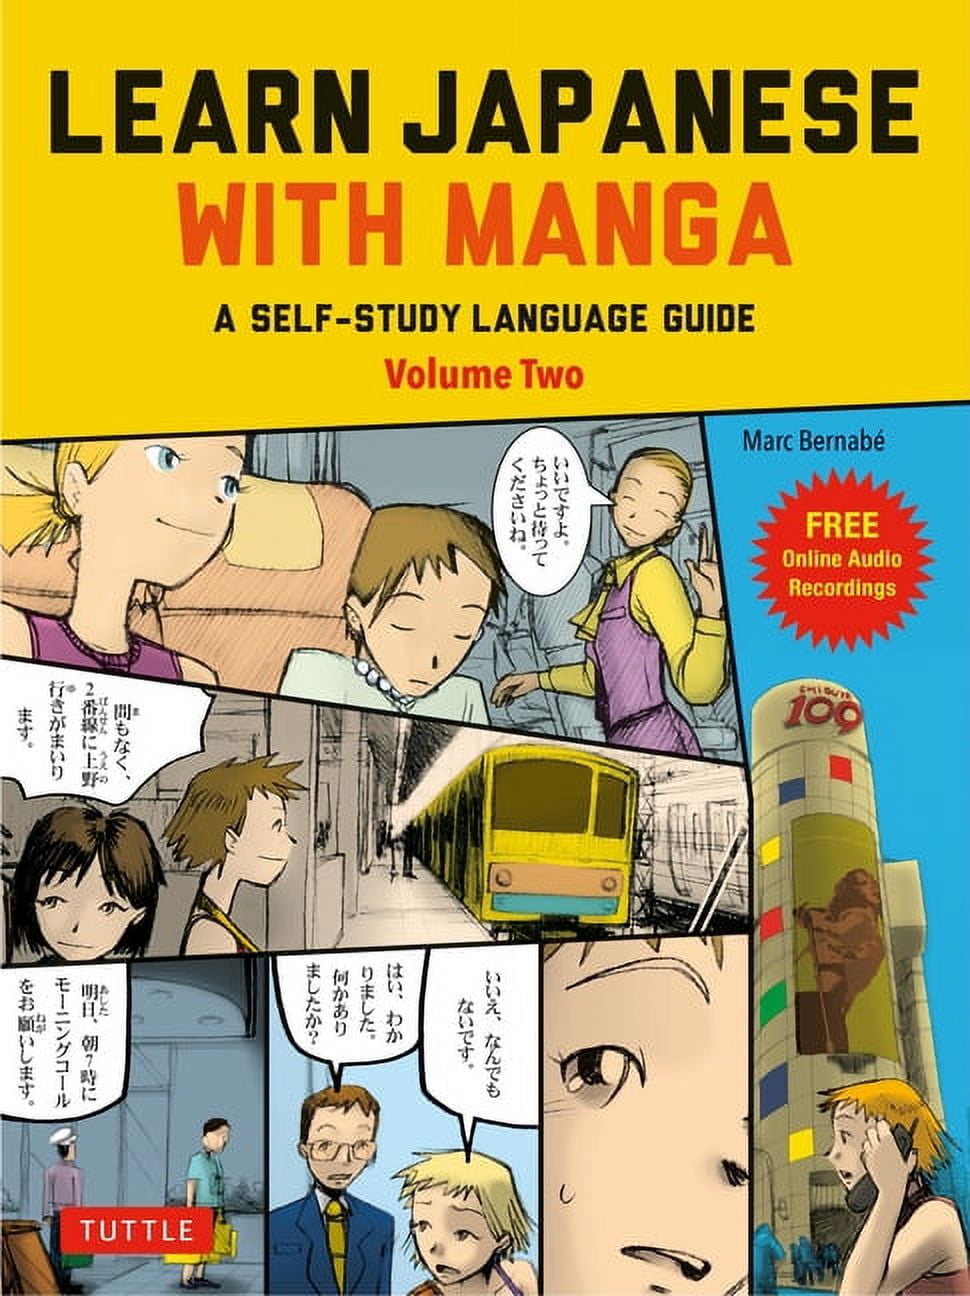 Learning Japanese? Here Are 12 Books I Highly Recommend